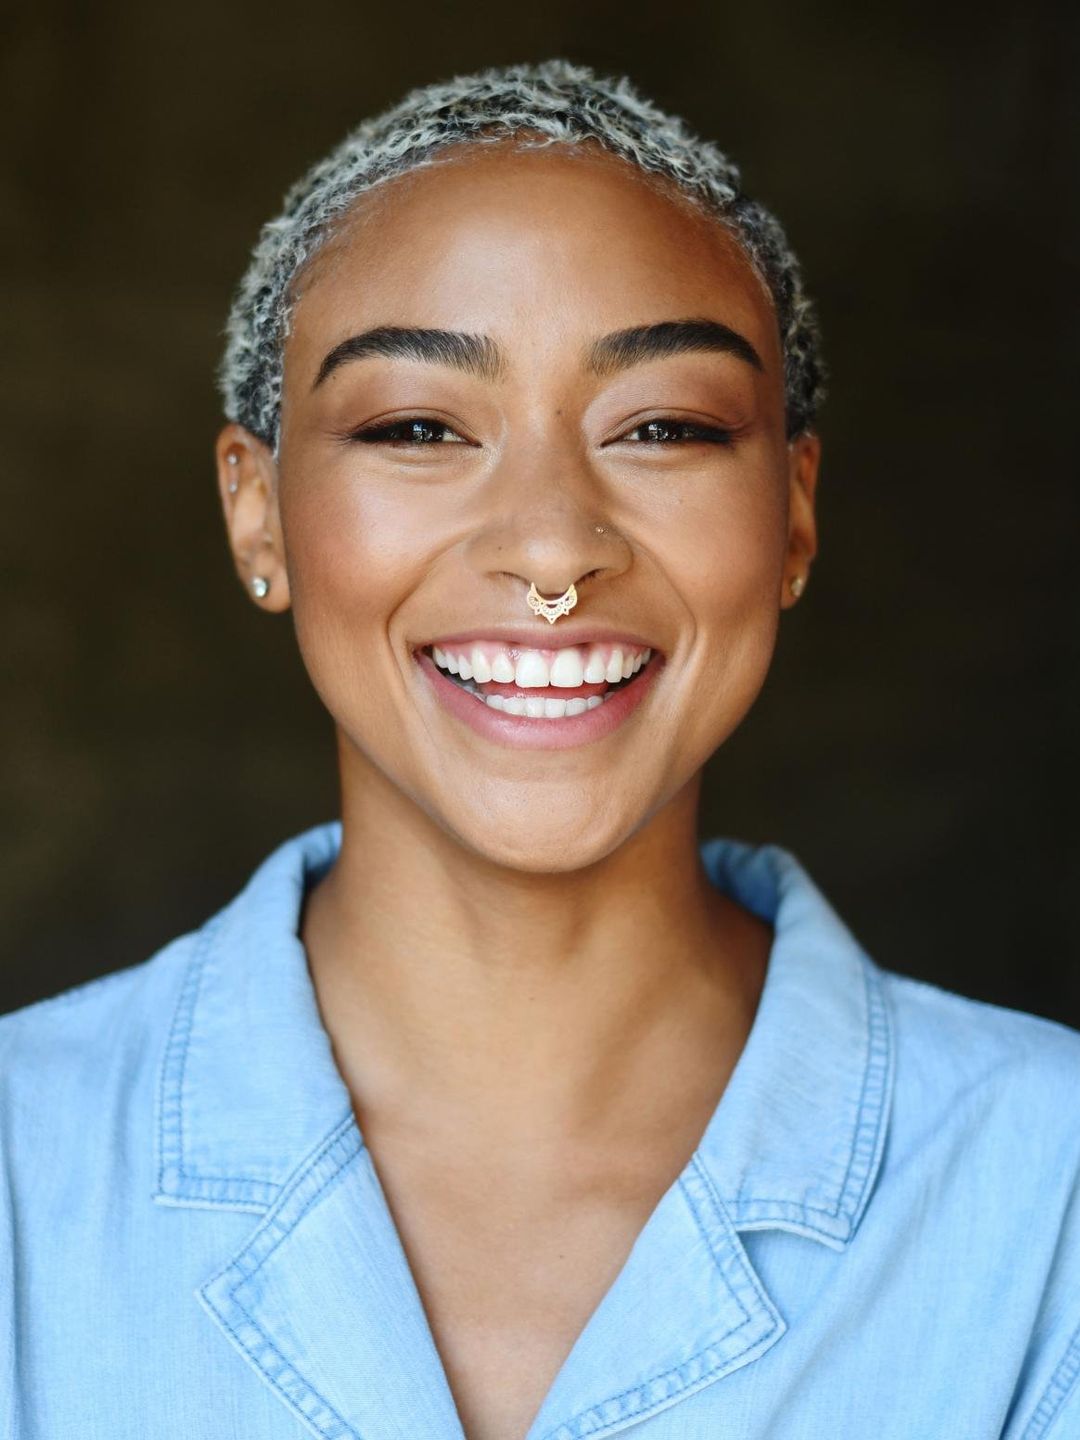 Tati Gabrielle how did she became famous